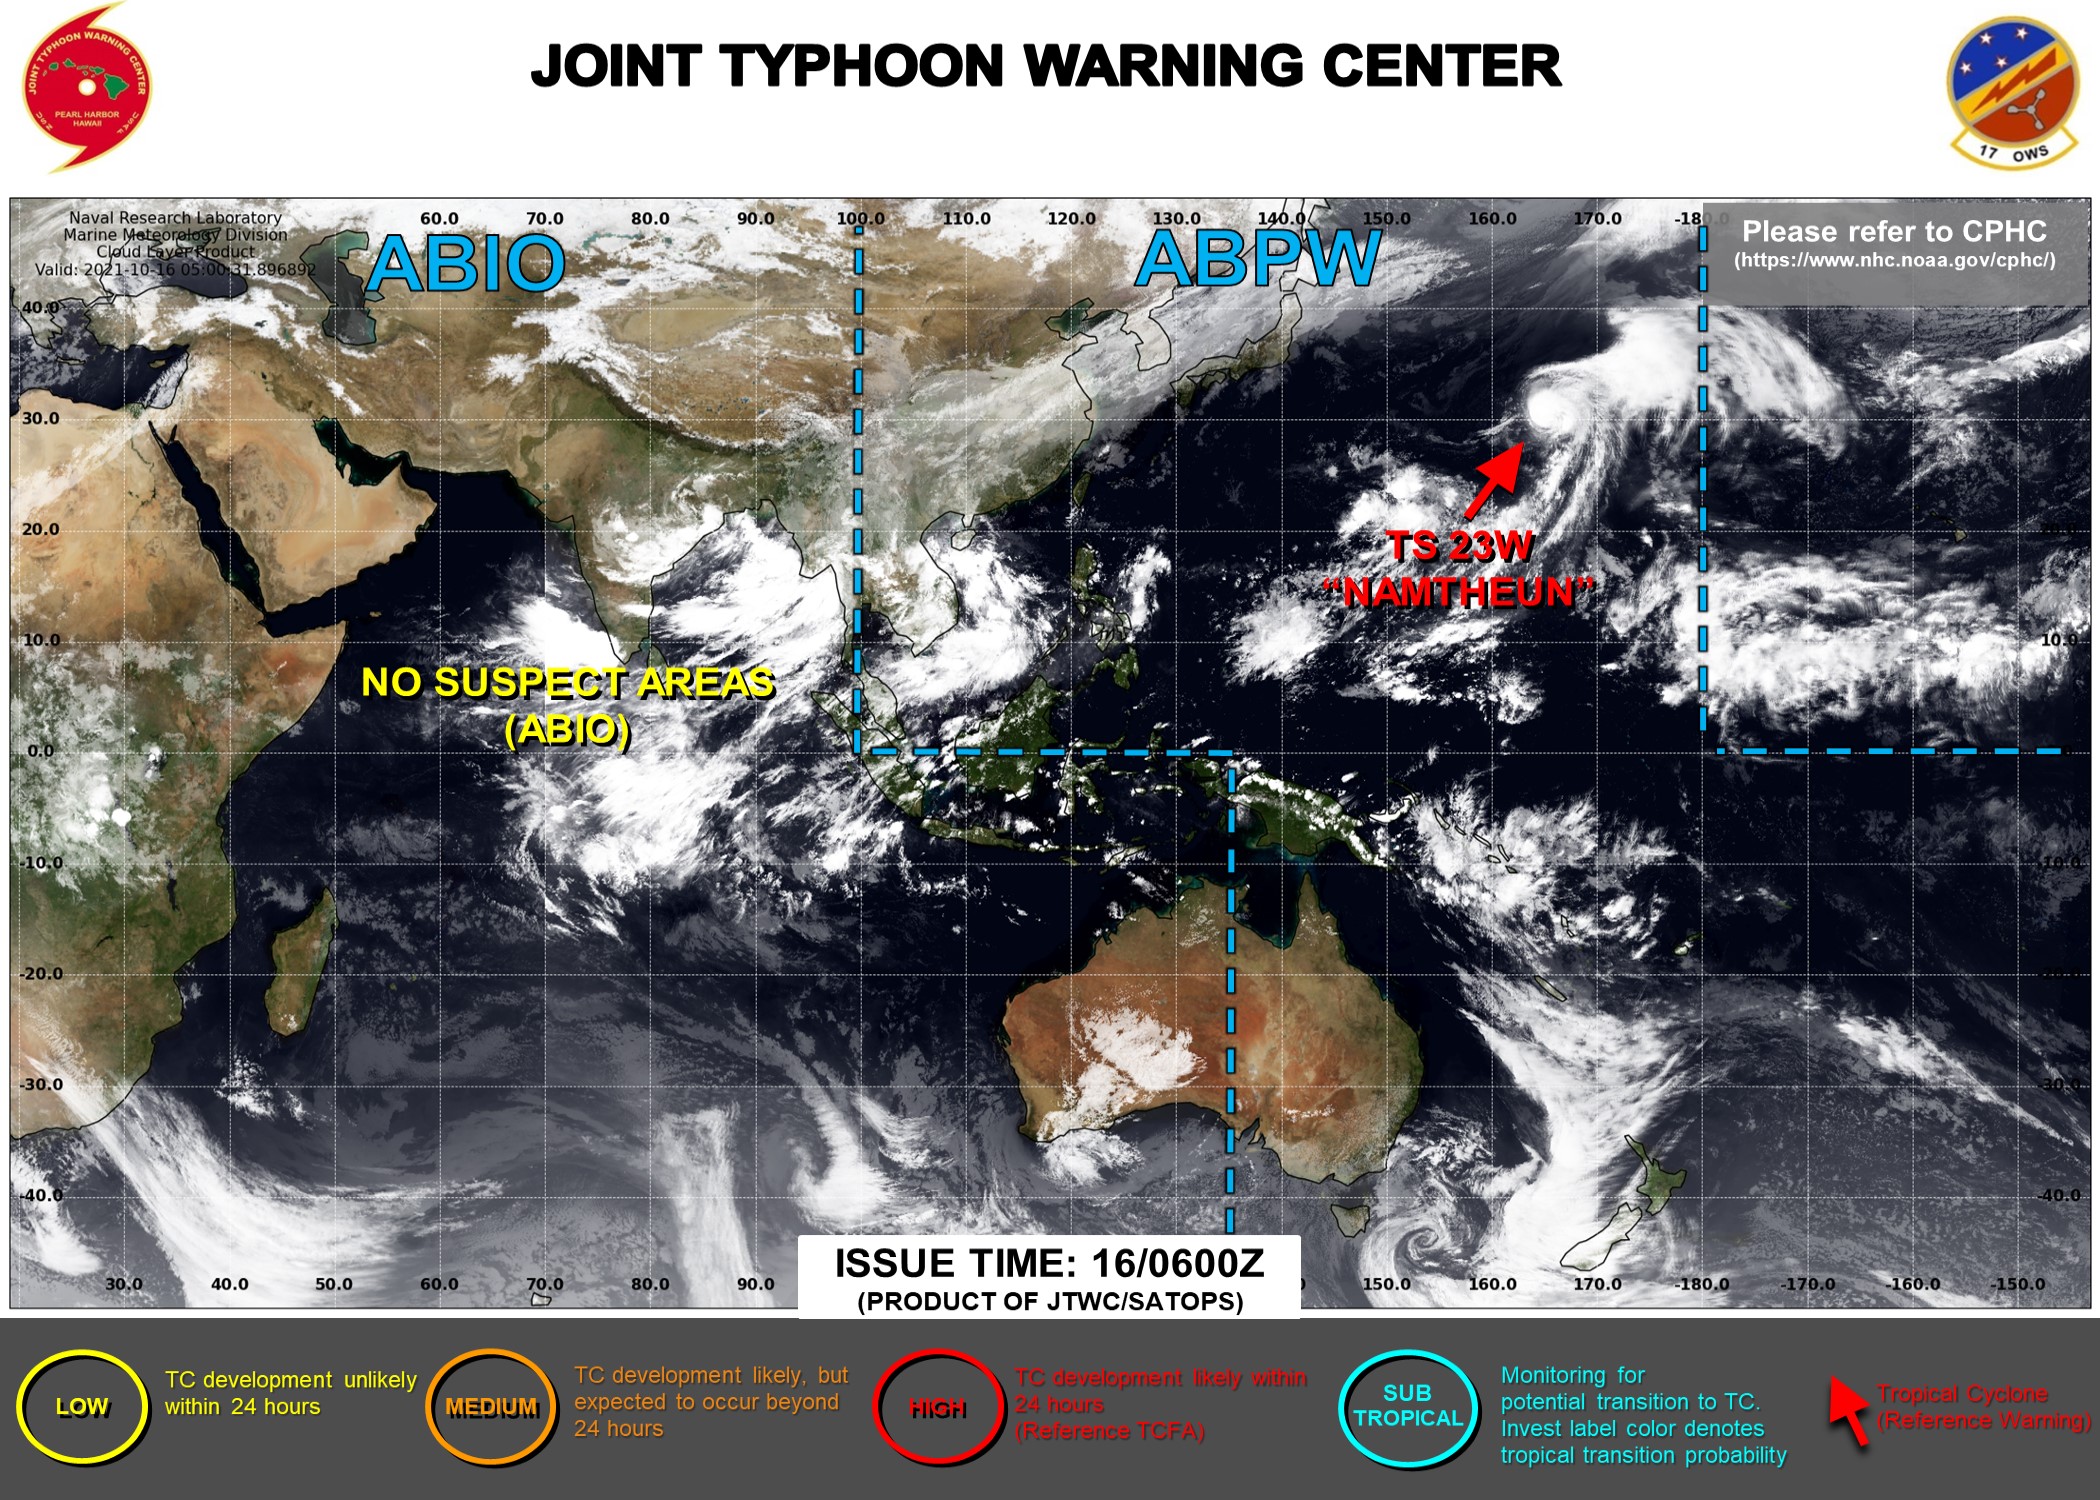 JTWC IS ISSUING 6 HOURLY WARNINGS AND 3HOURLY SATELLITE BULLETINS ON TS 23W.